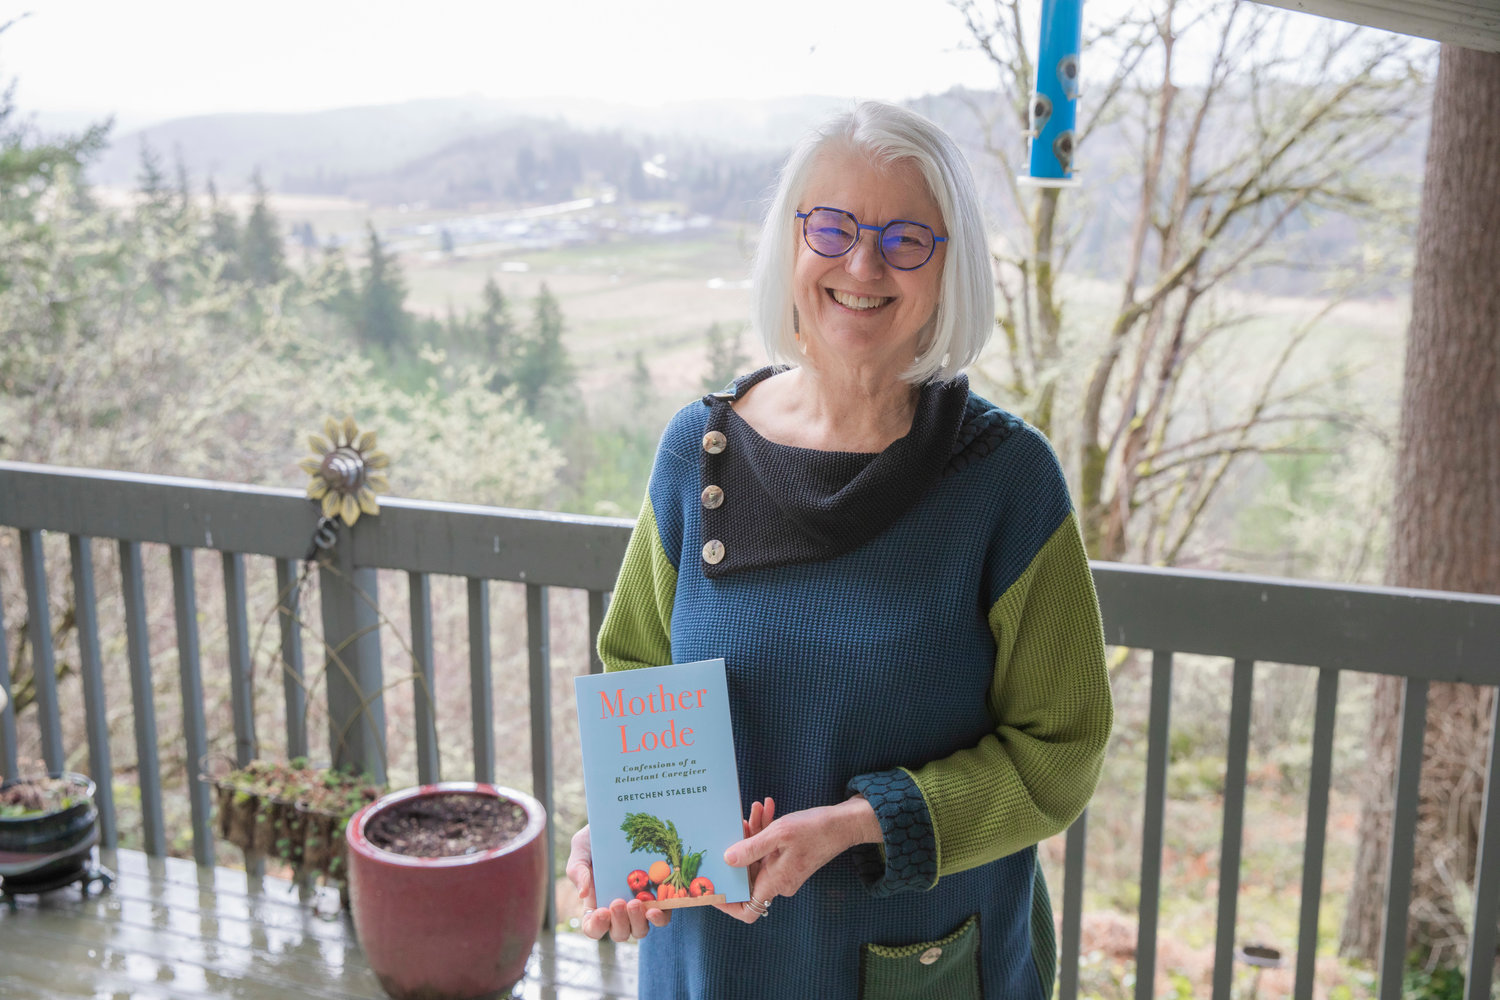 Gretchen Staebler smiles for a photo with her book titled “Mother Lode, Confessions of a Reluctant Caregiver” at her residence off Seminary Hill Road in Centralia.